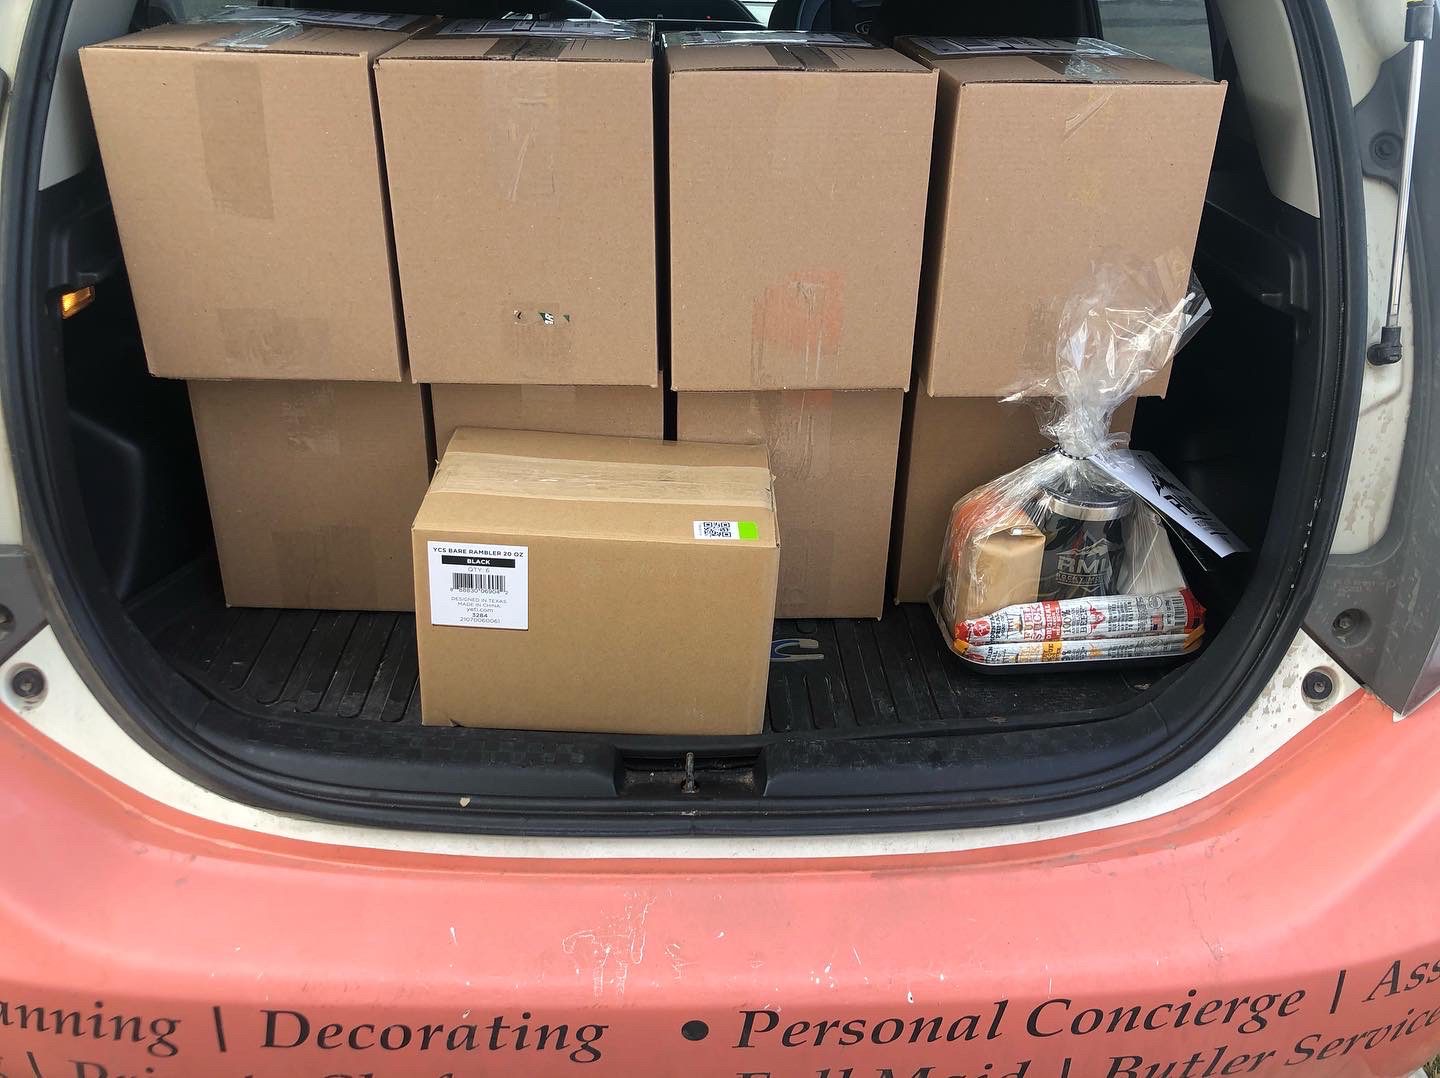 A trunk with boxes and a box of cake in it.